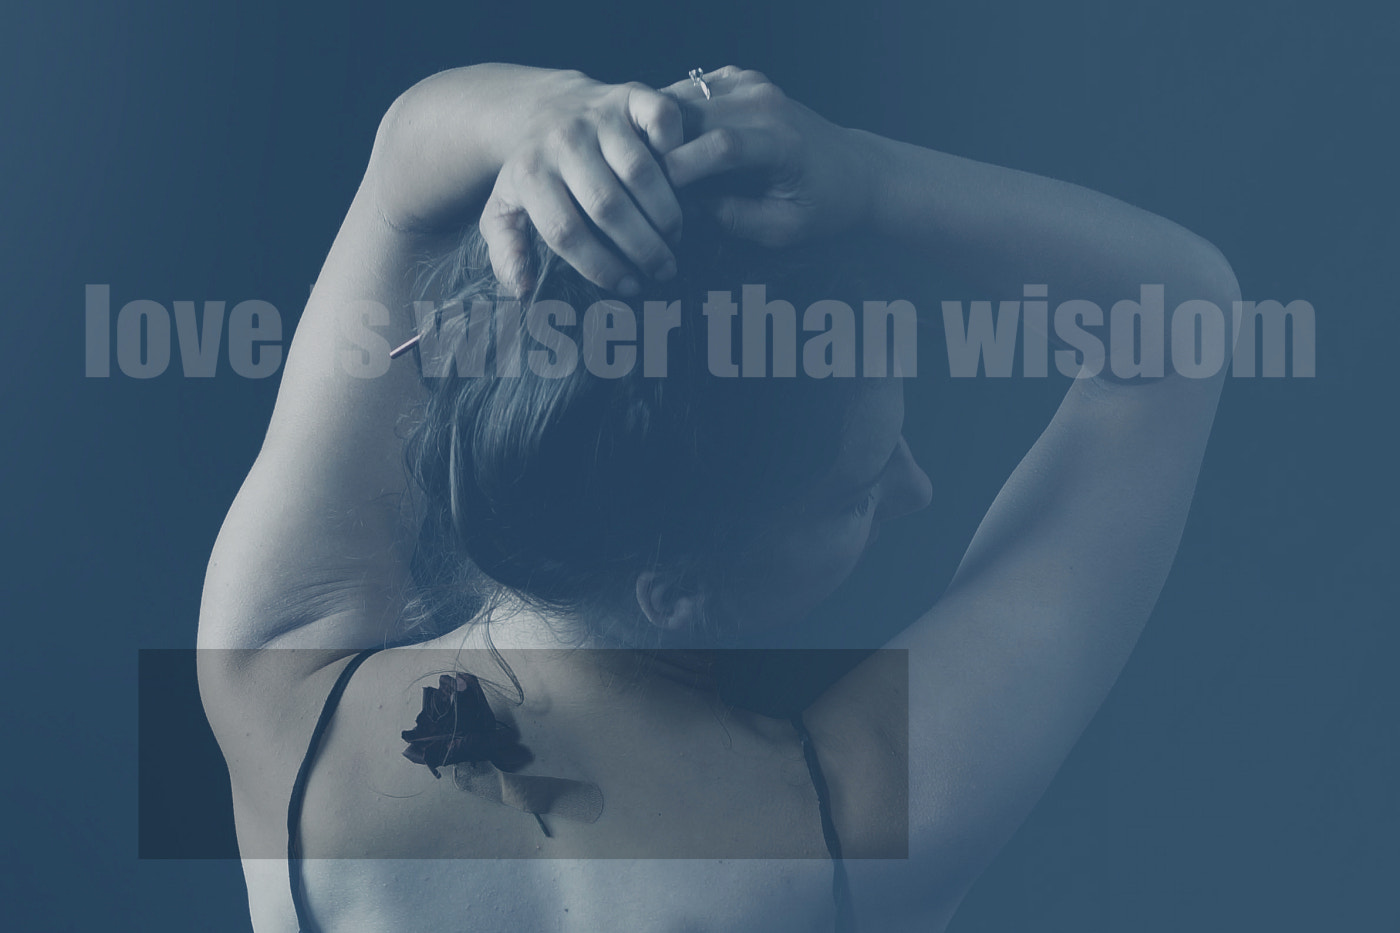 Hasselblad HV sample photo. Love is wiser than wisdom - the name of rose photography